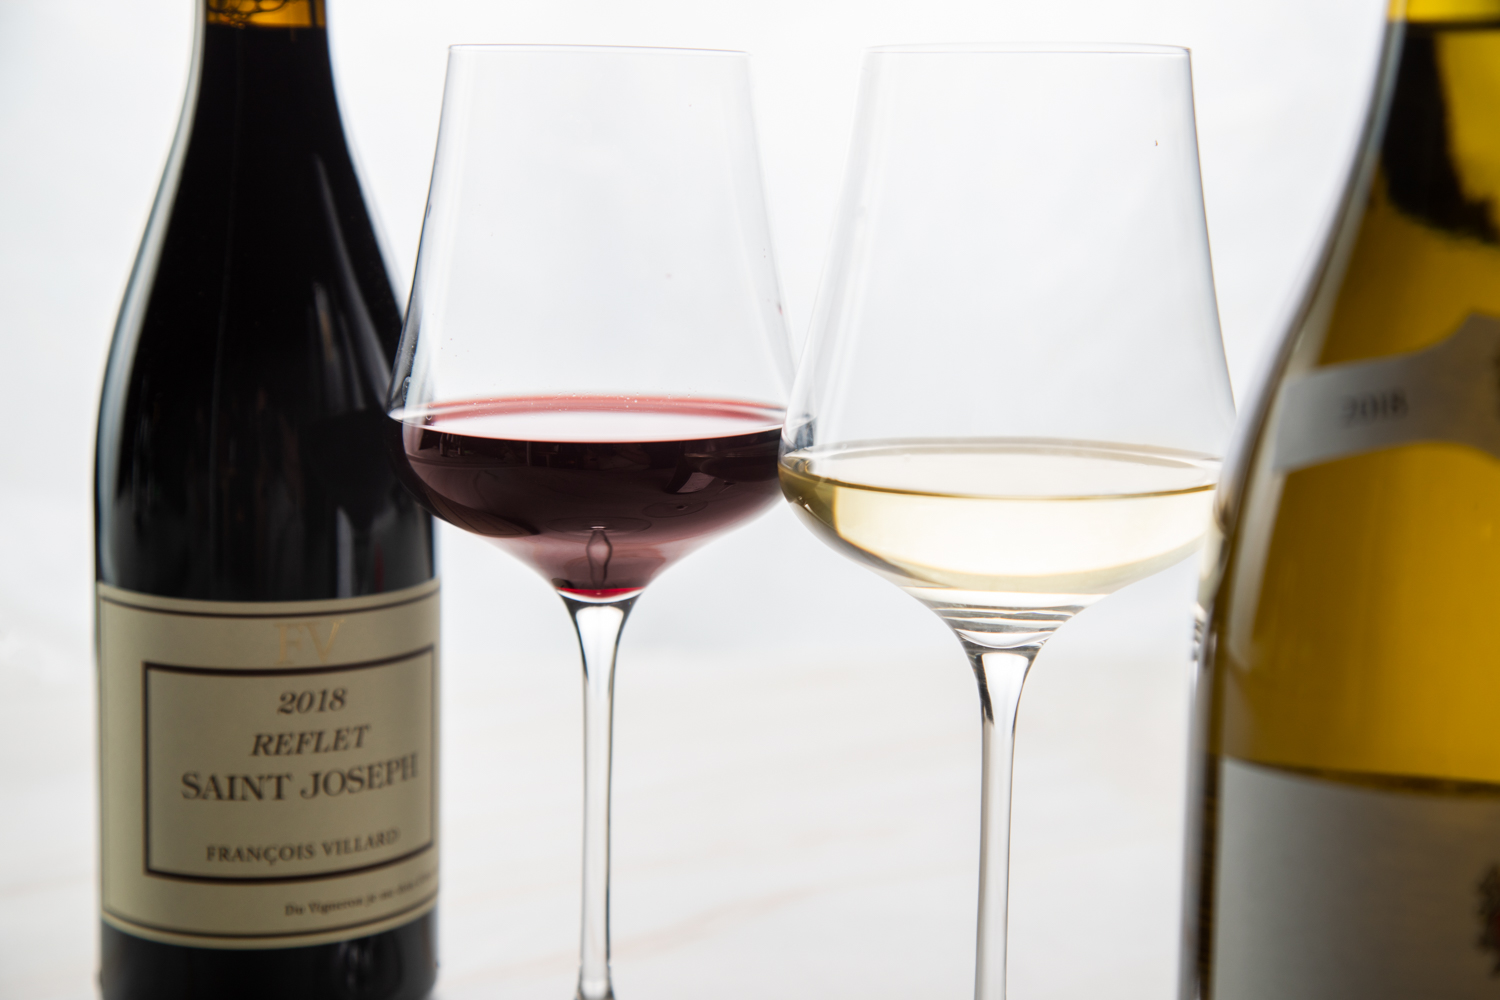 How To Buy Luxury Wine When You’re on a Budget